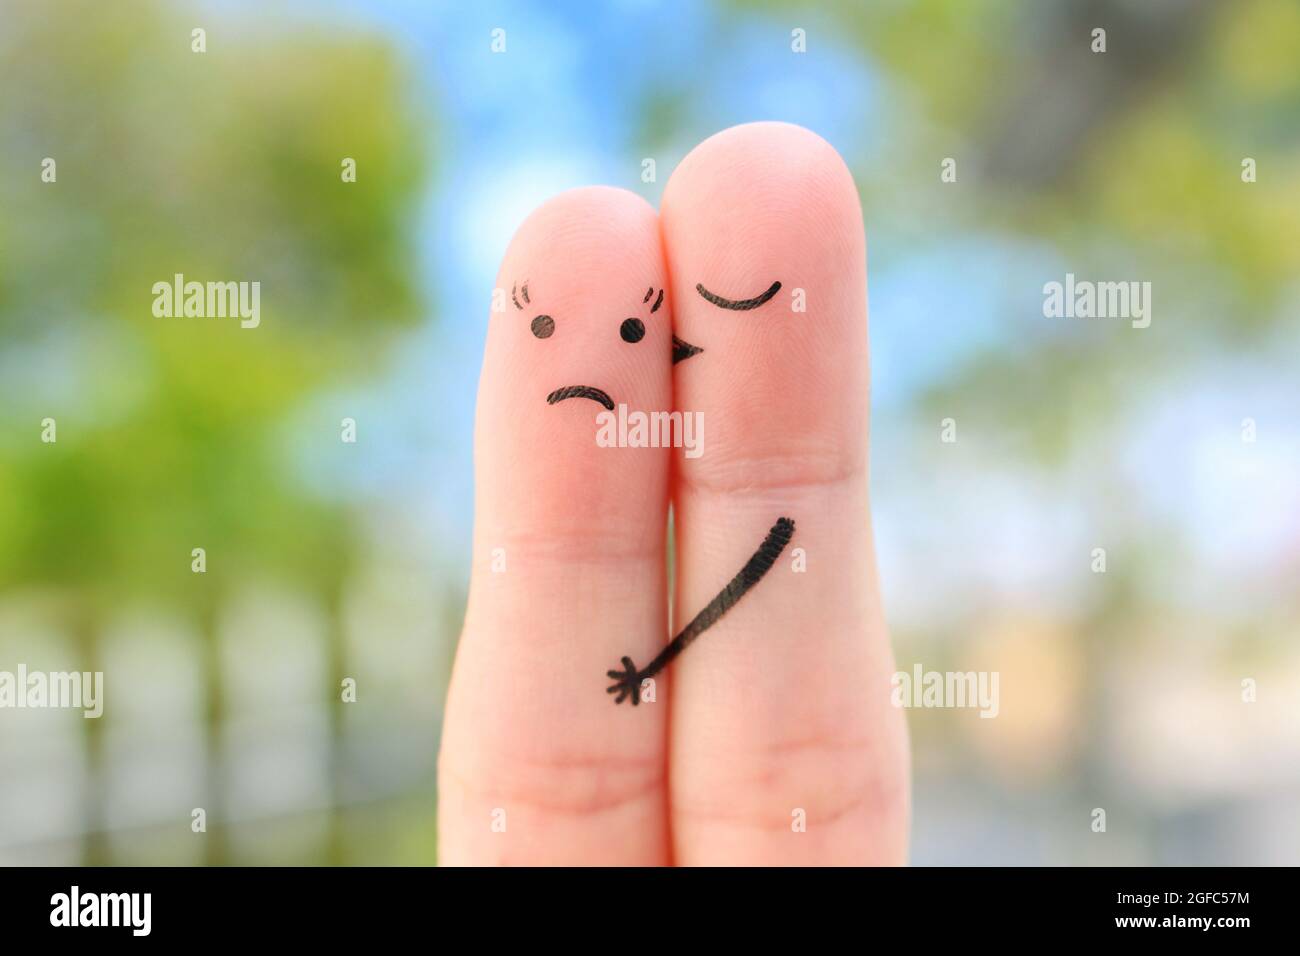 Fingers art of couple. Concept of woman doesn't like the man who loves her. Stock Photo